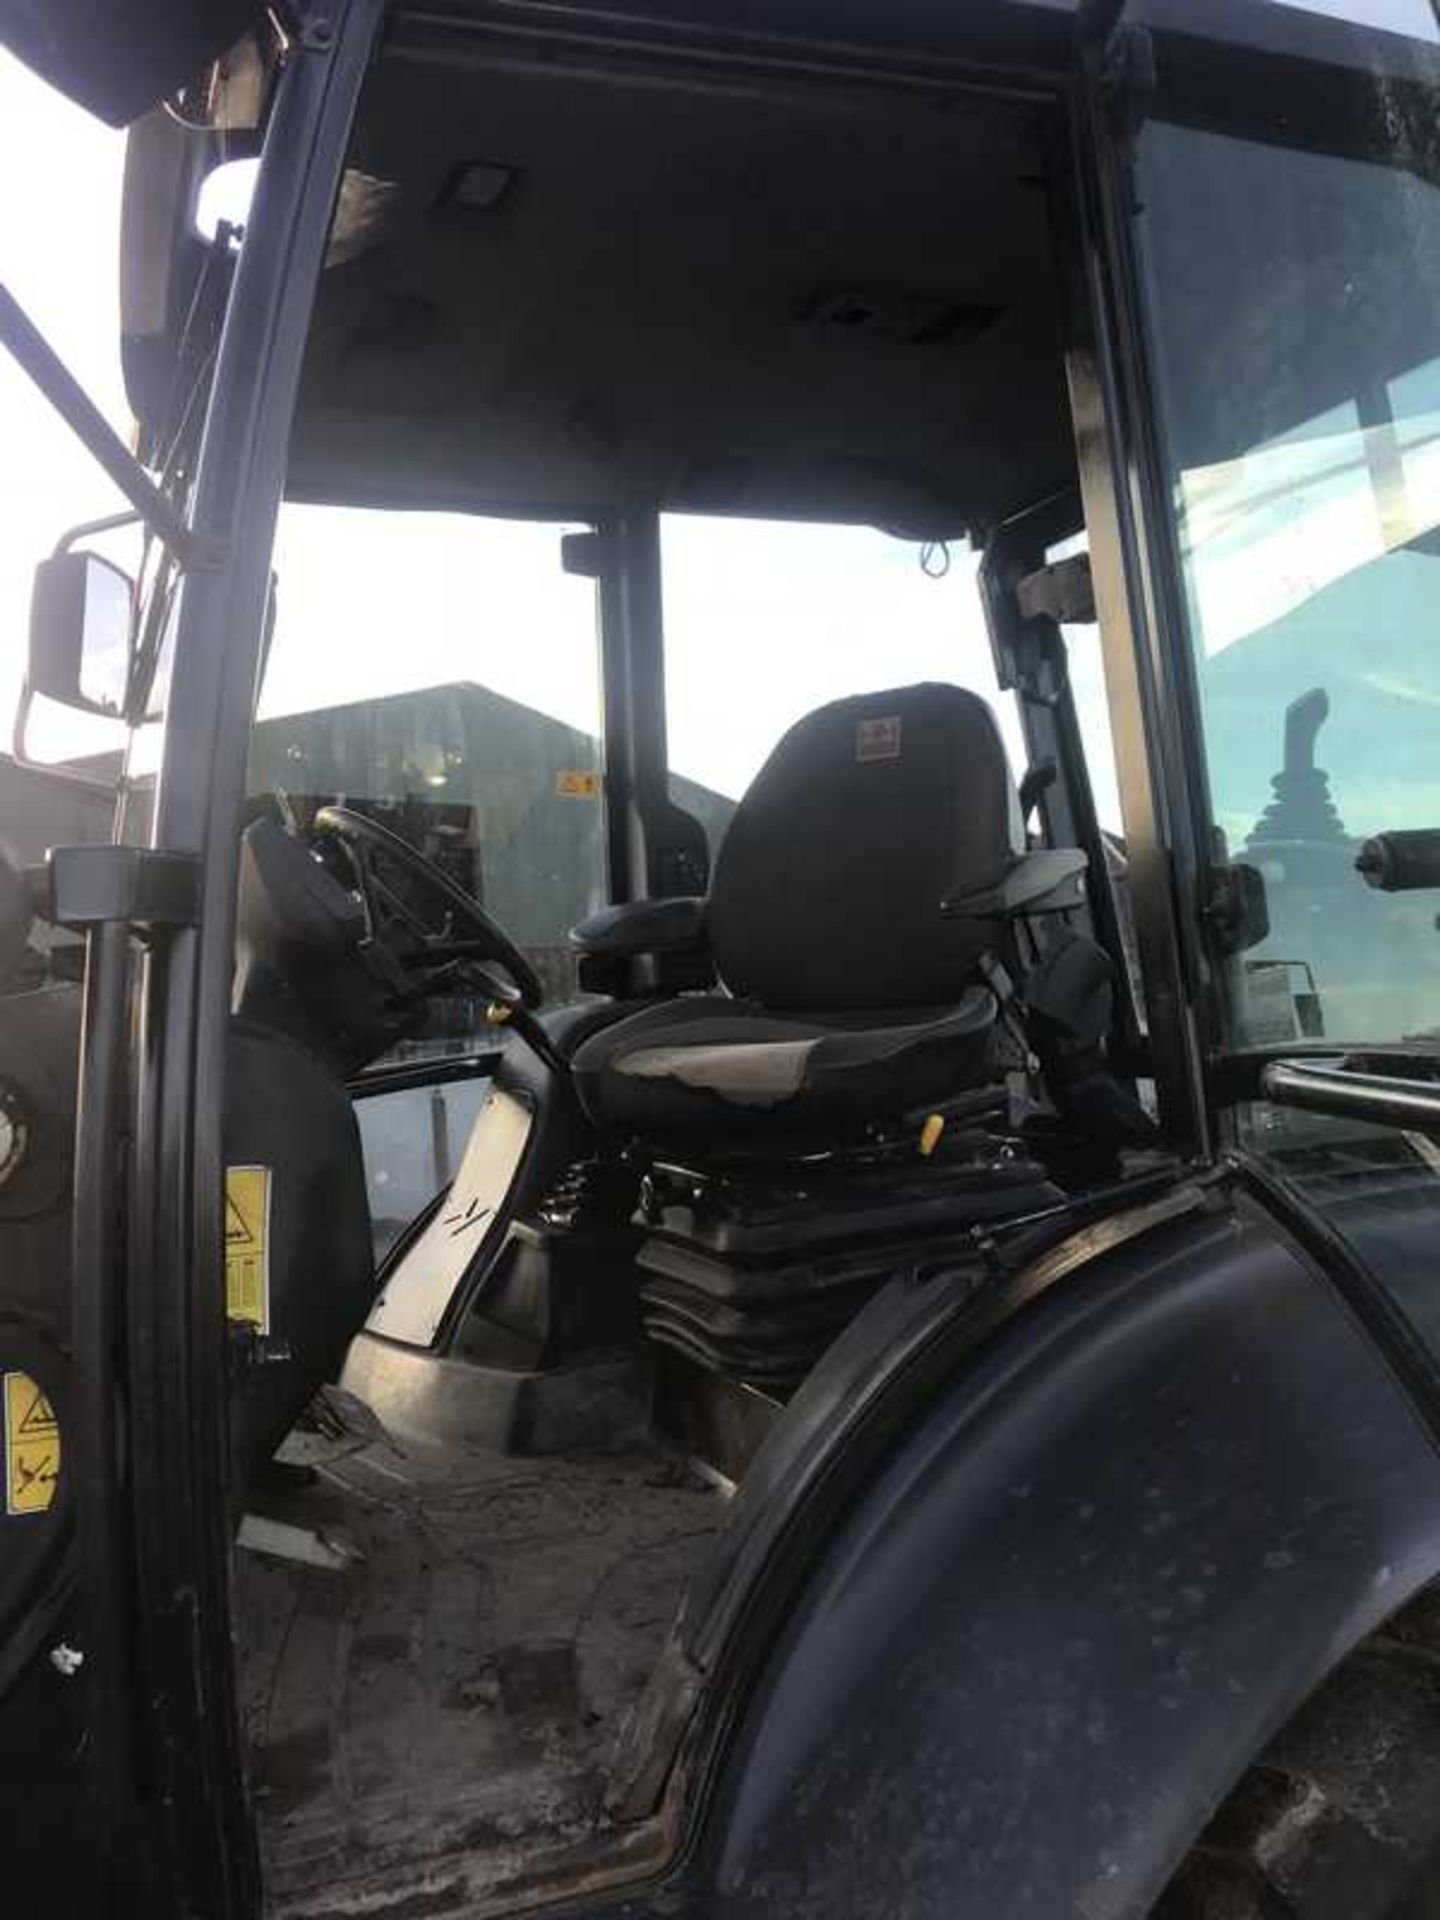 2011 TEREX 880 backhoe digger loader, full set of 5 buckets, Quick hitch, 3737 hrs (not verified), R - Image 5 of 11